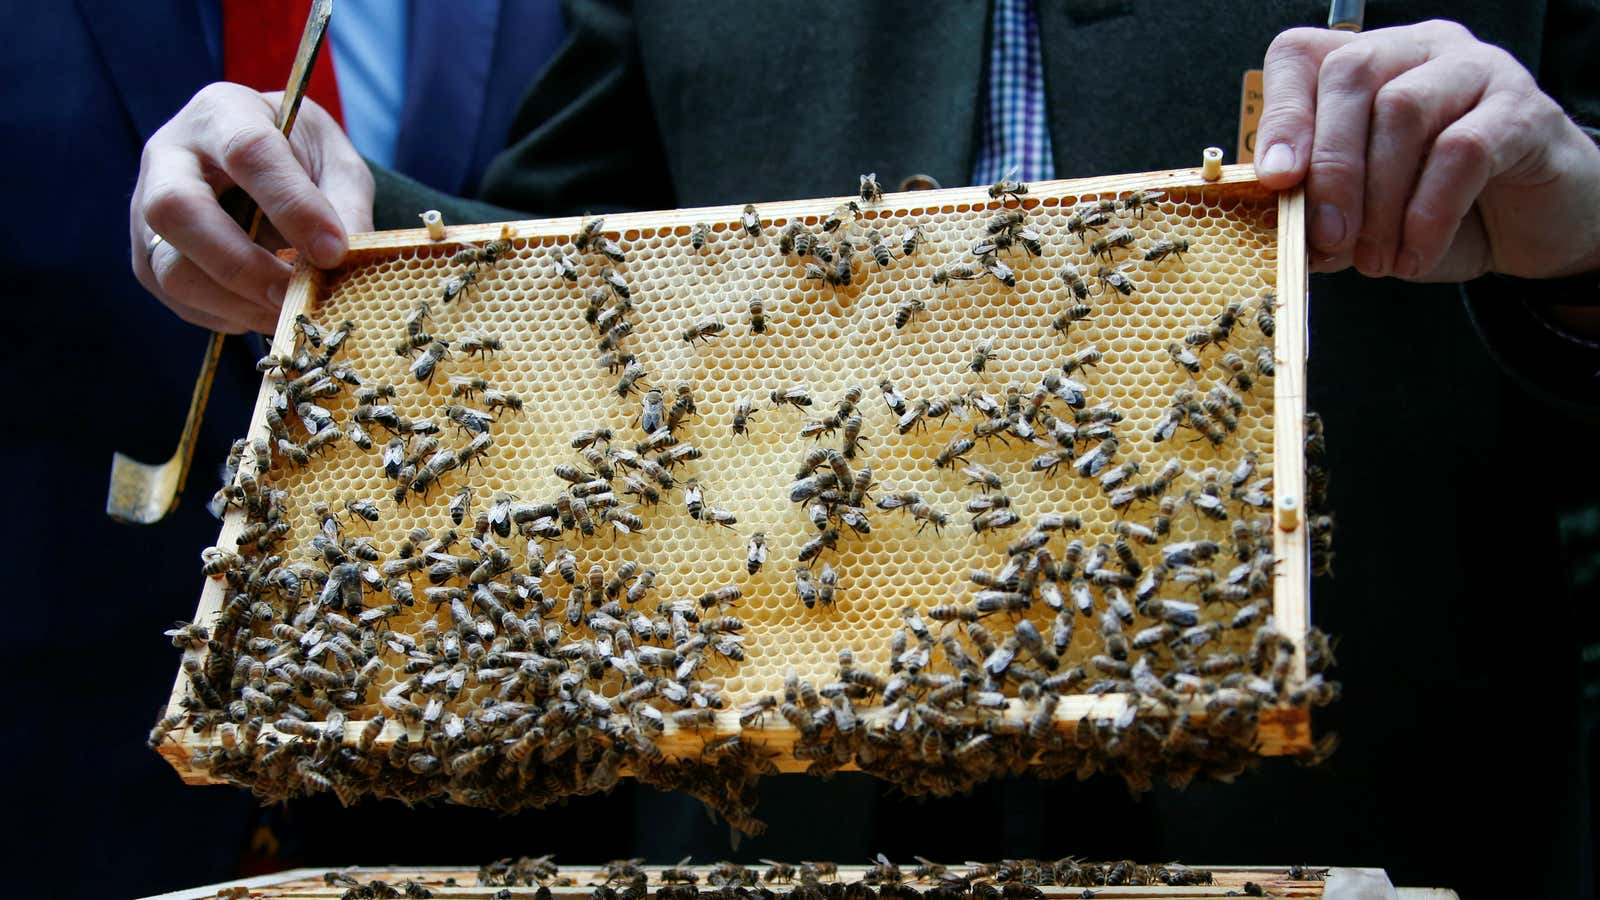 It’s more bad news for honey bees.